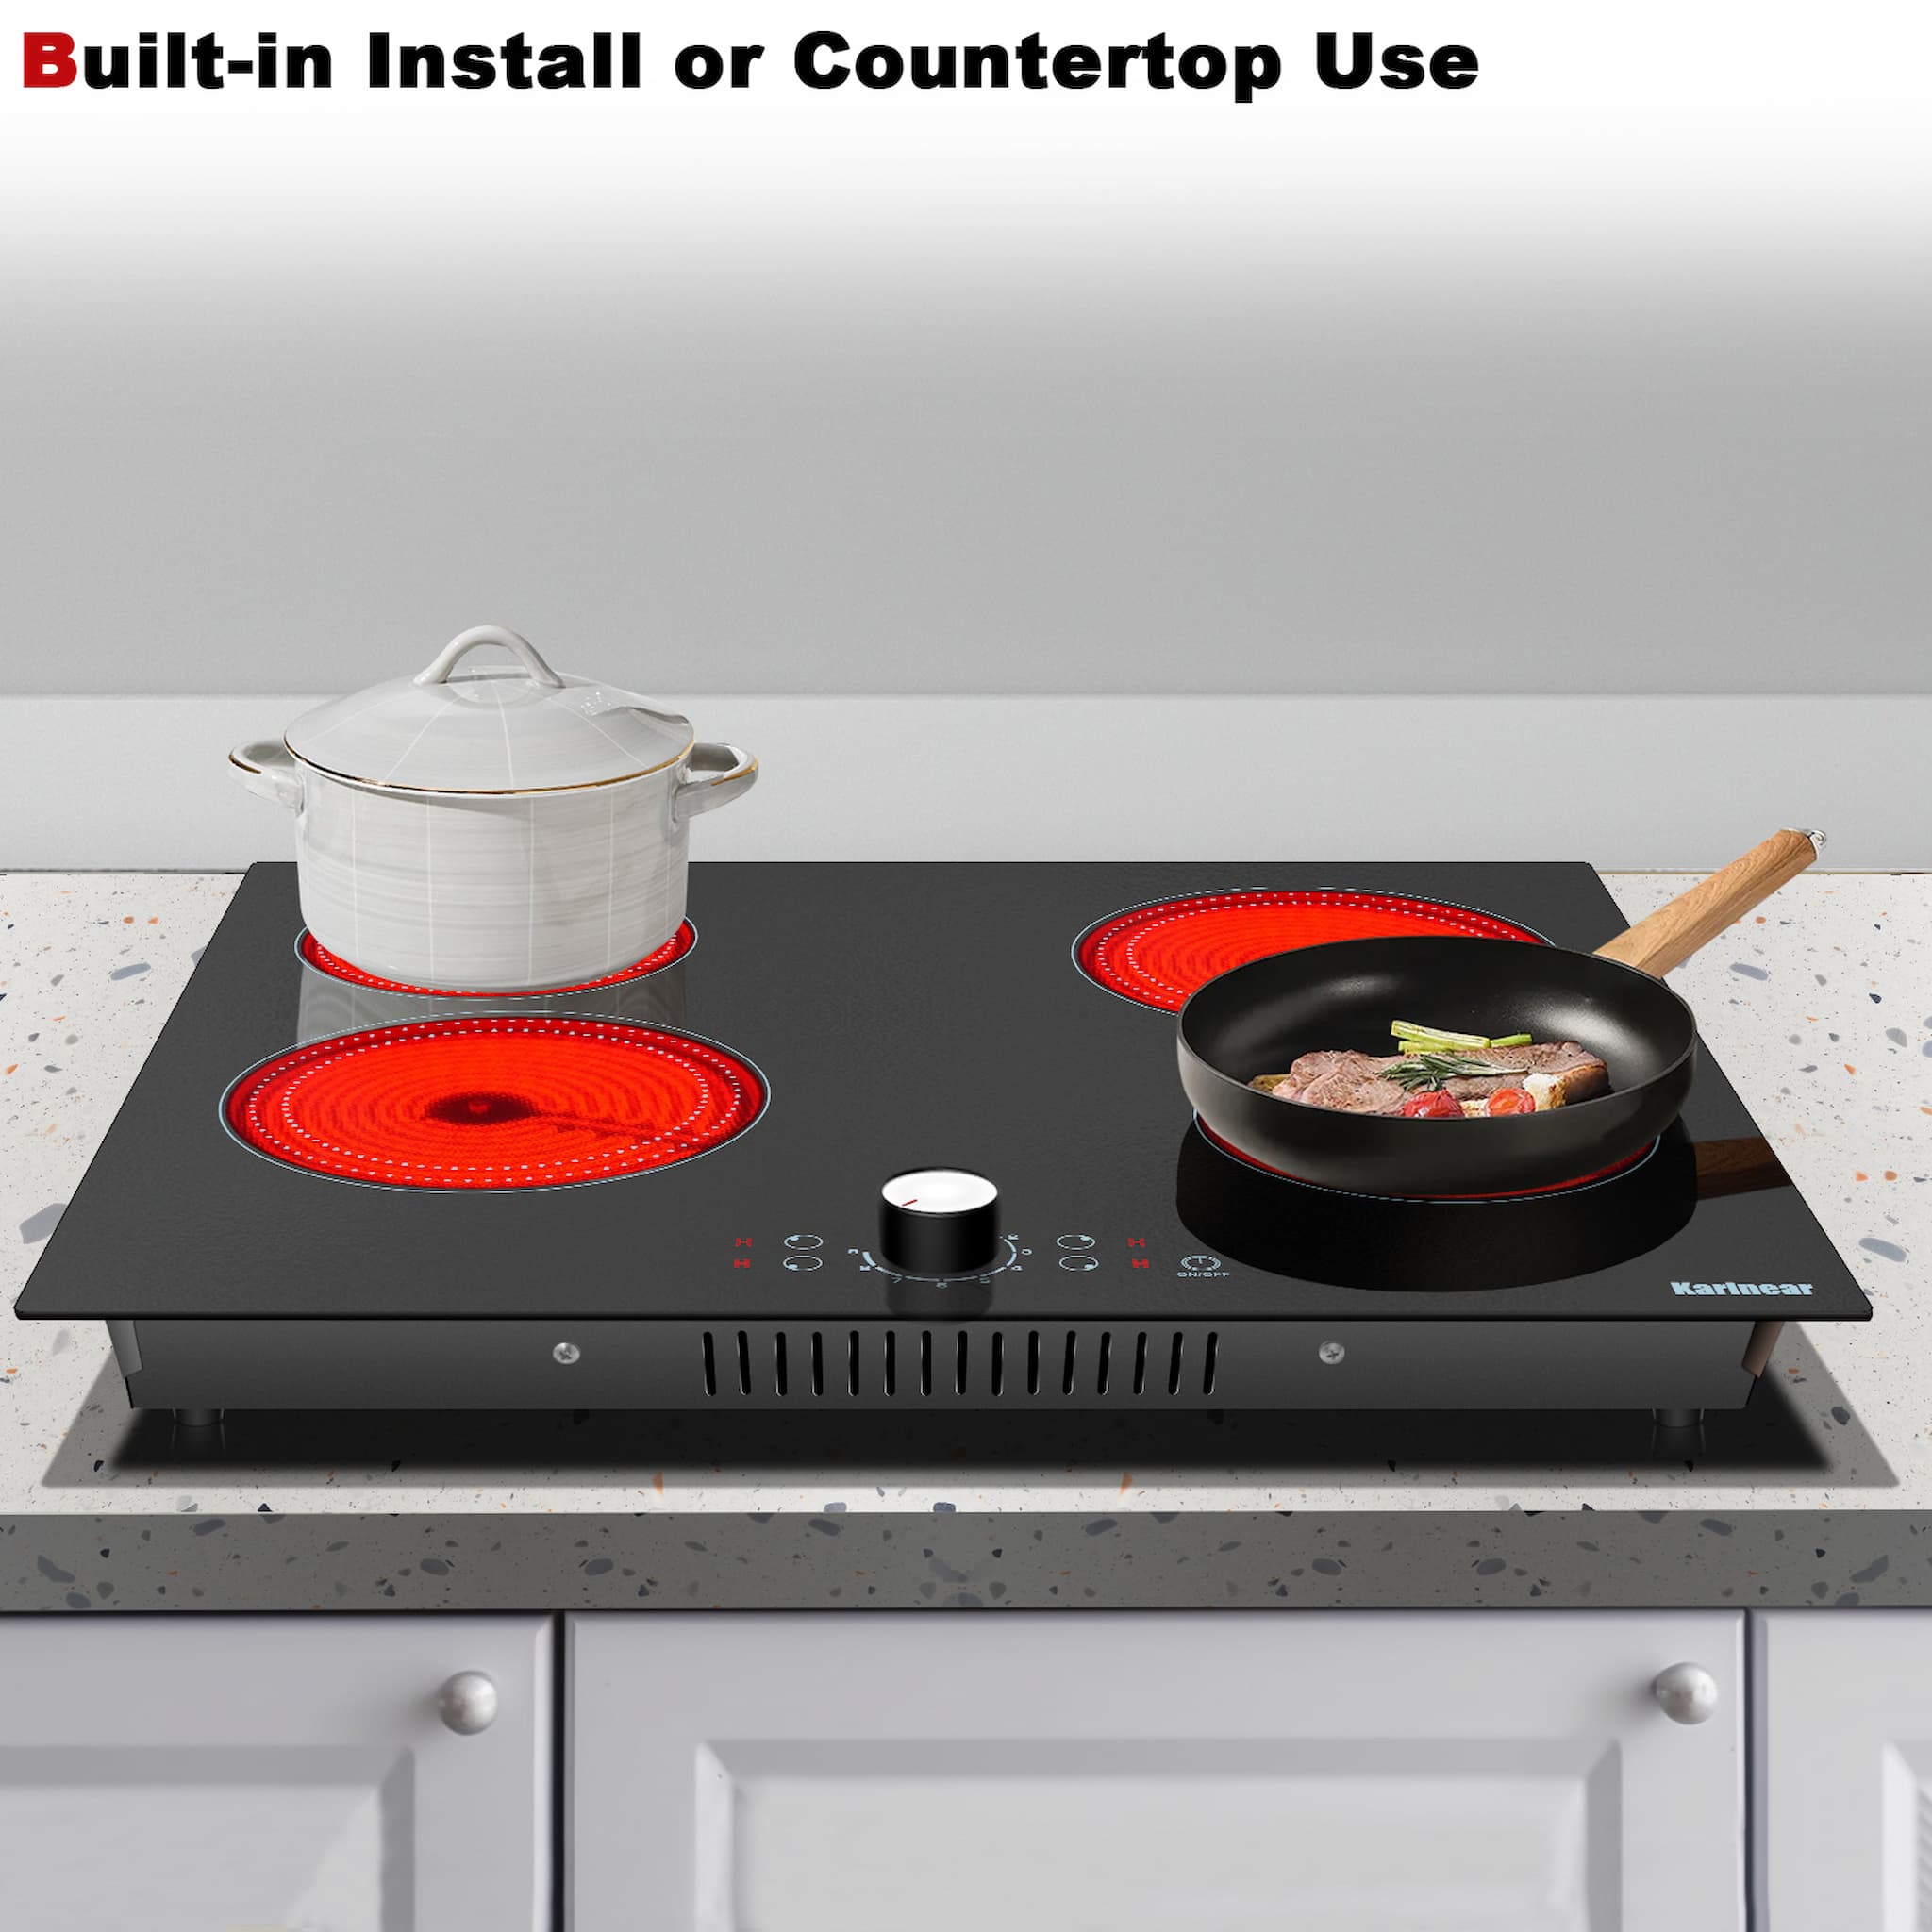 Cooksir 24'' Electric Cooktop 4 Burner Built-in Induction Cooktop Knob  Control